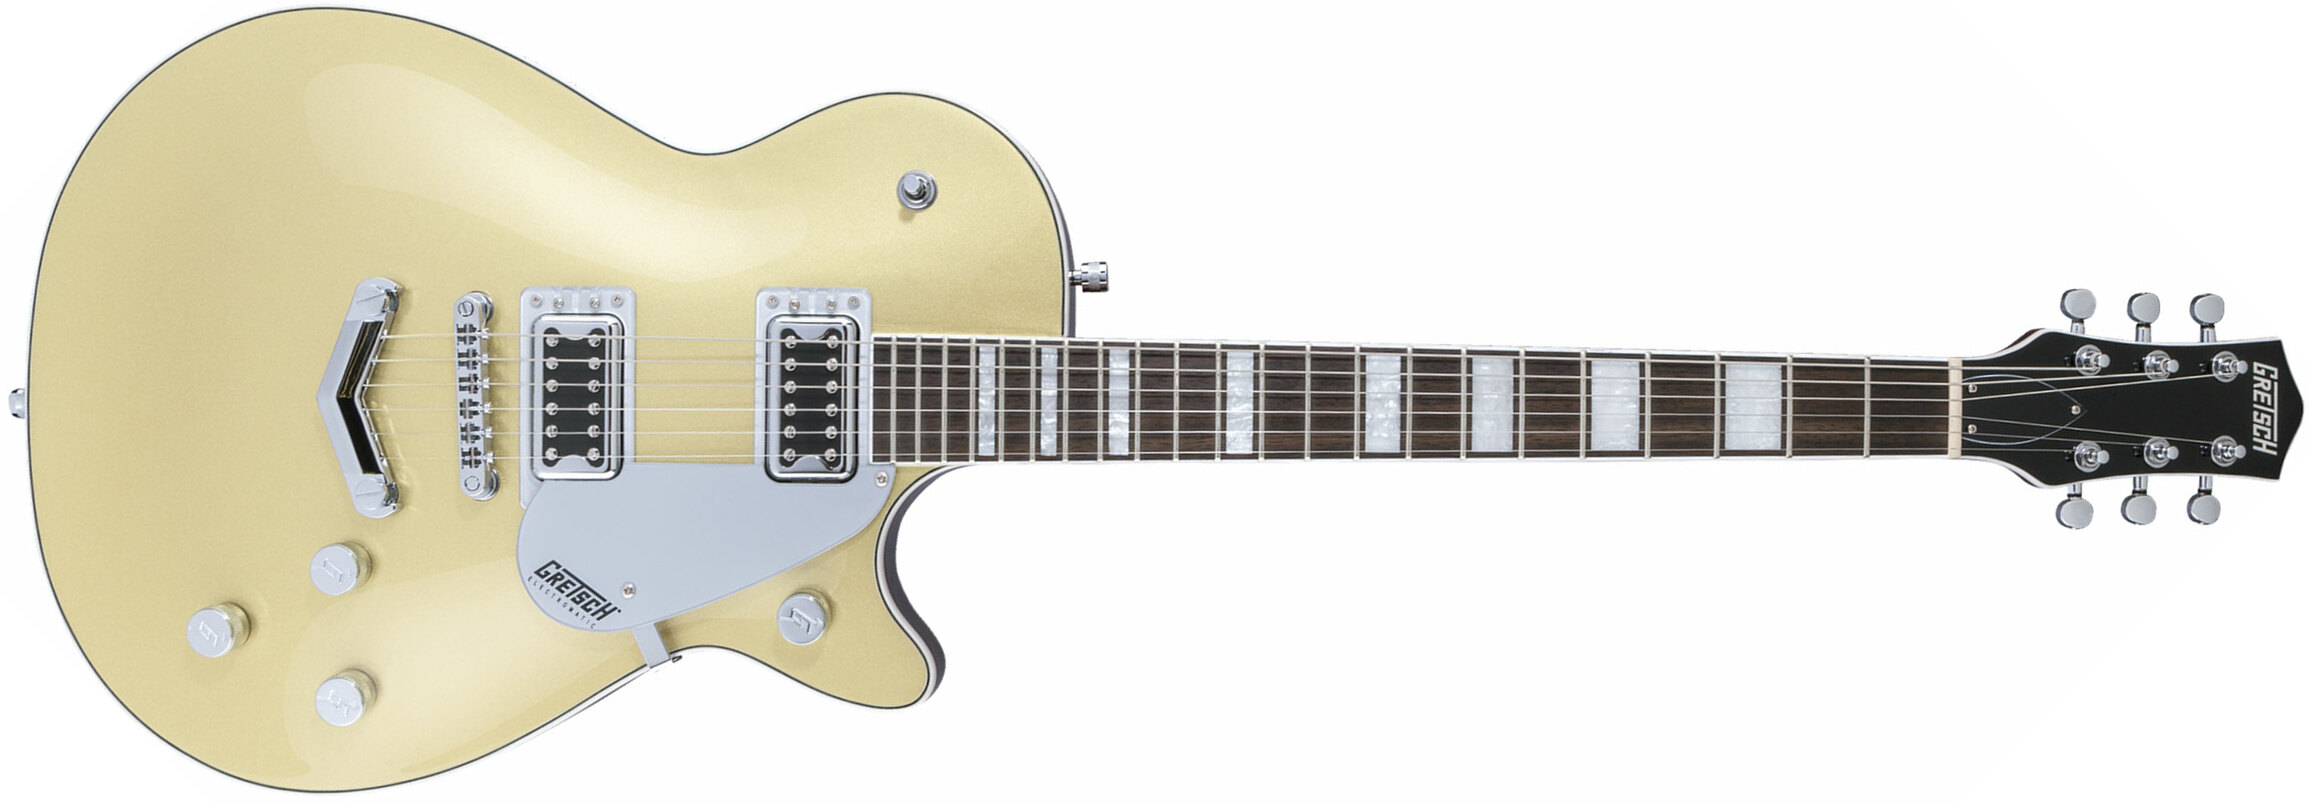 Gretsch G5220 Electromatic Jet Bt V-stoptail Hh Ht Wal - Casino Gold - Single cut electric guitar - Main picture